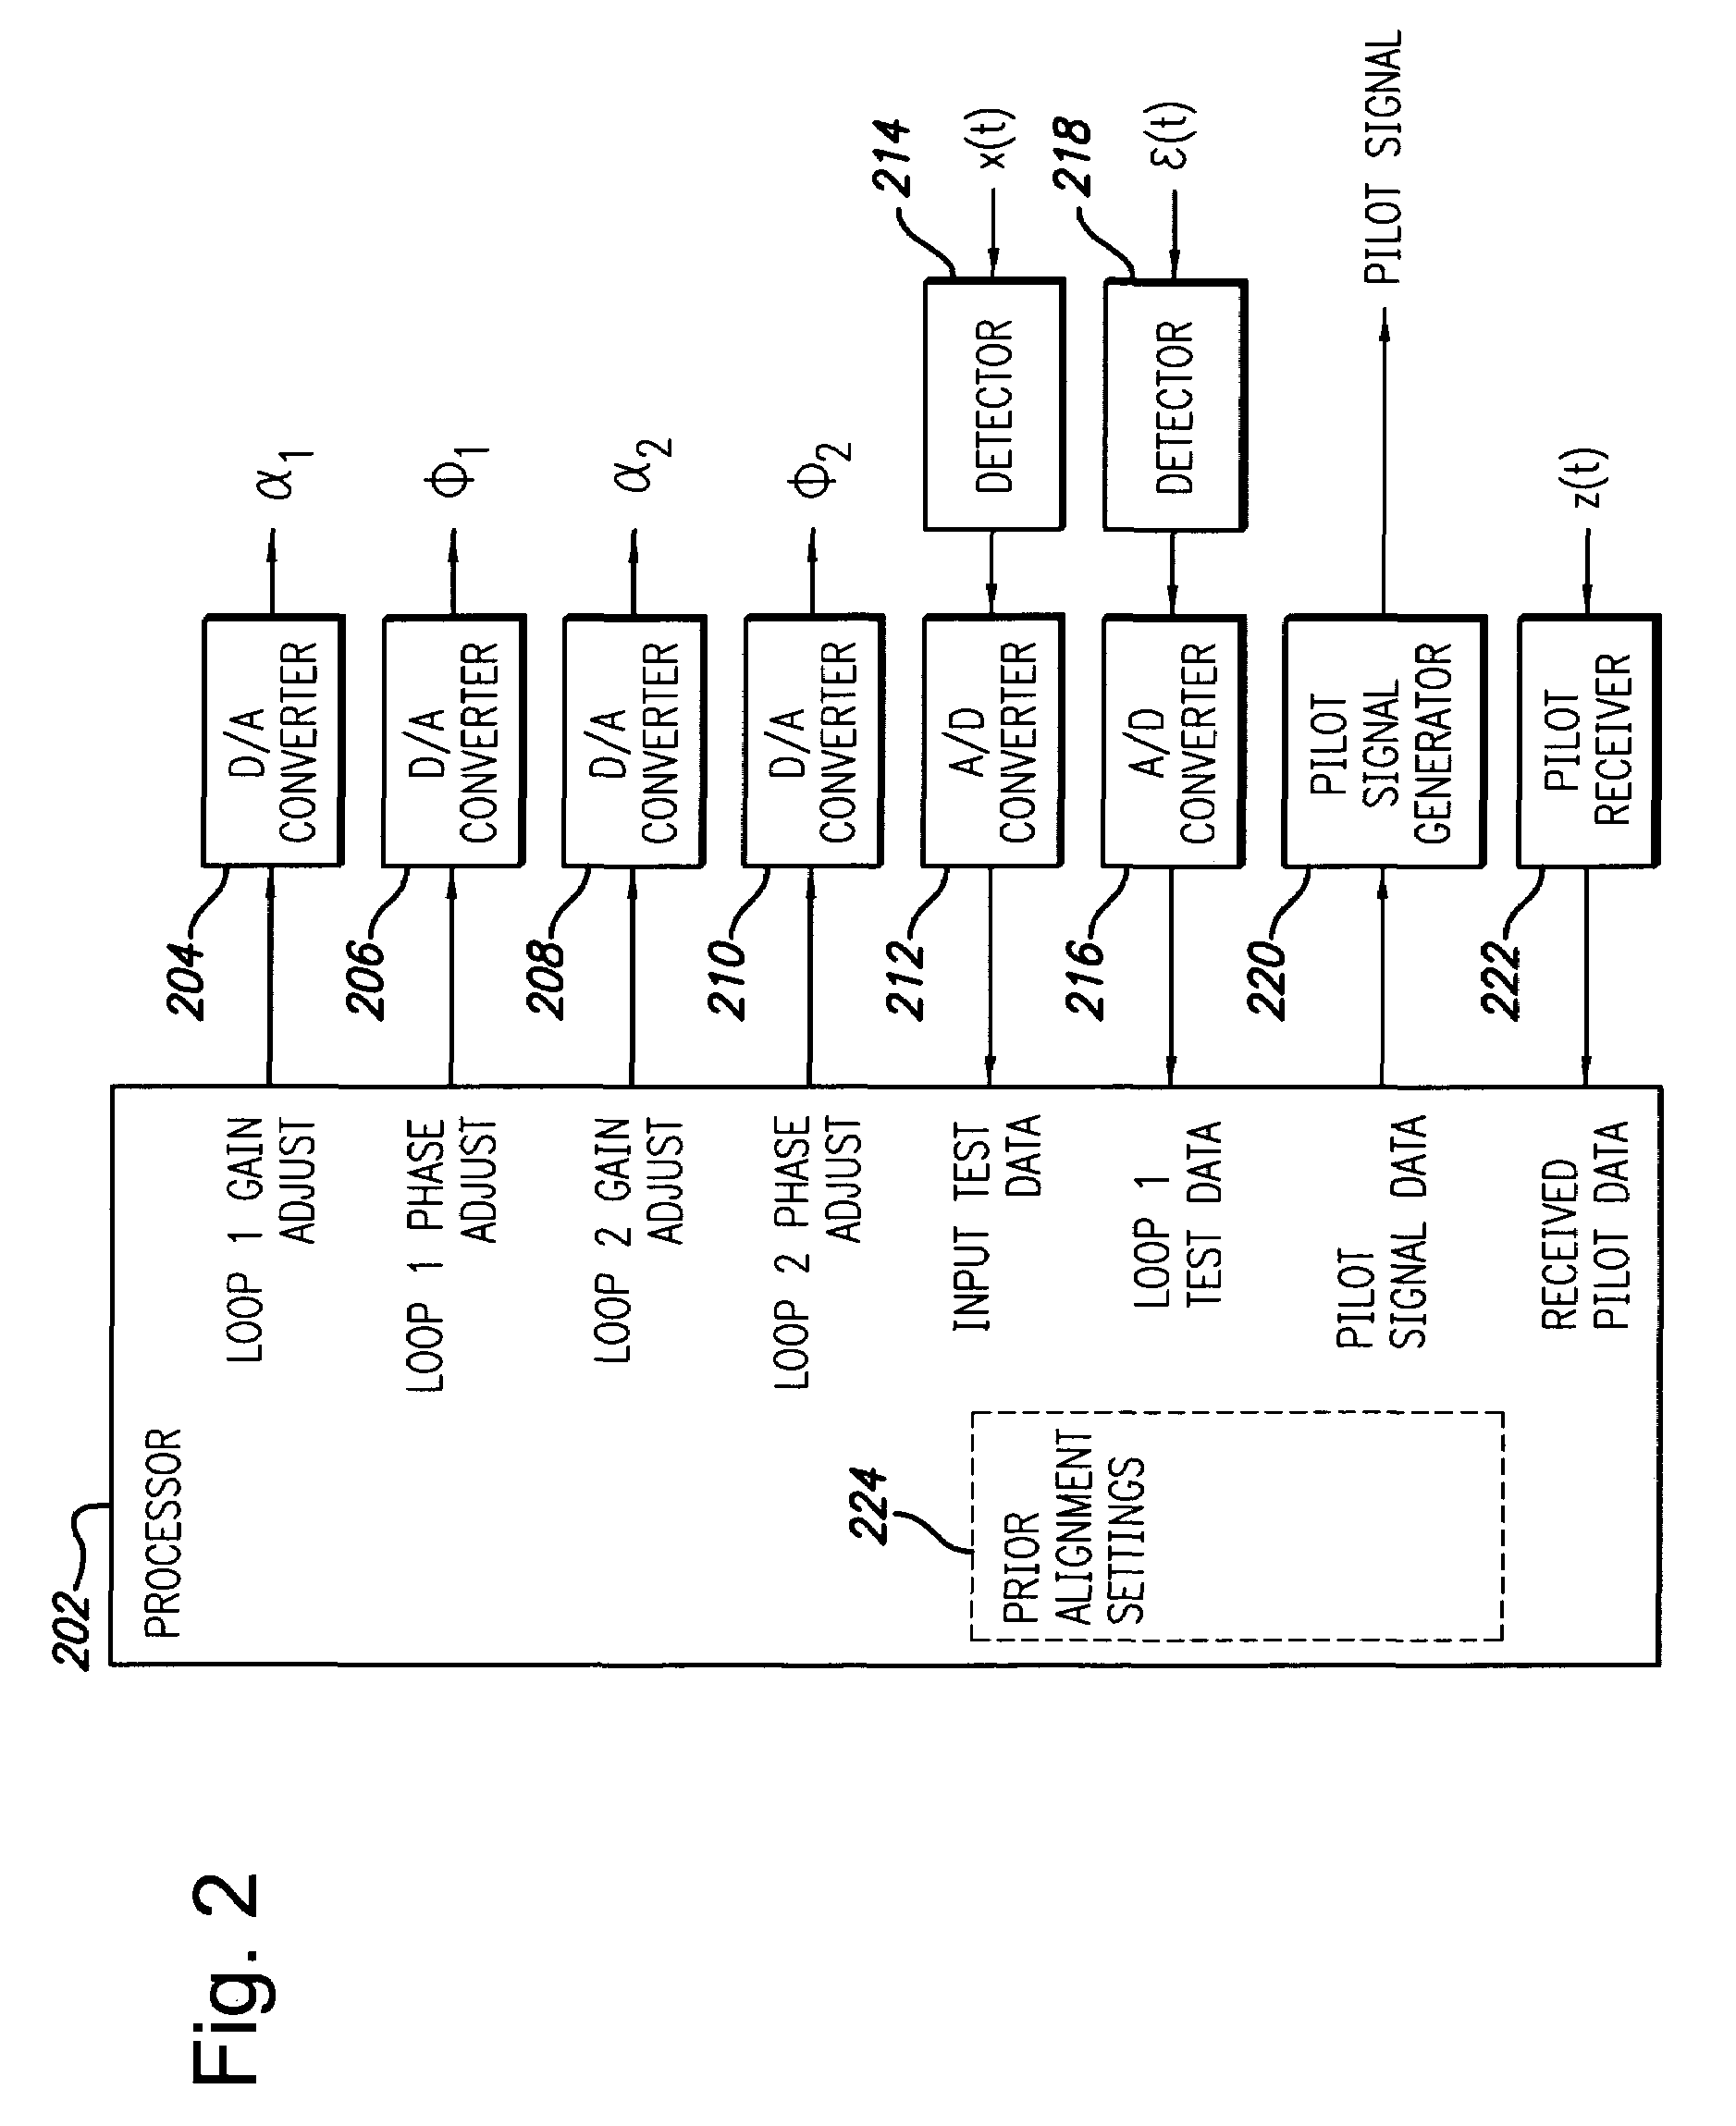 System and method for control of loop alignment in adaptive feed forward amplifiers